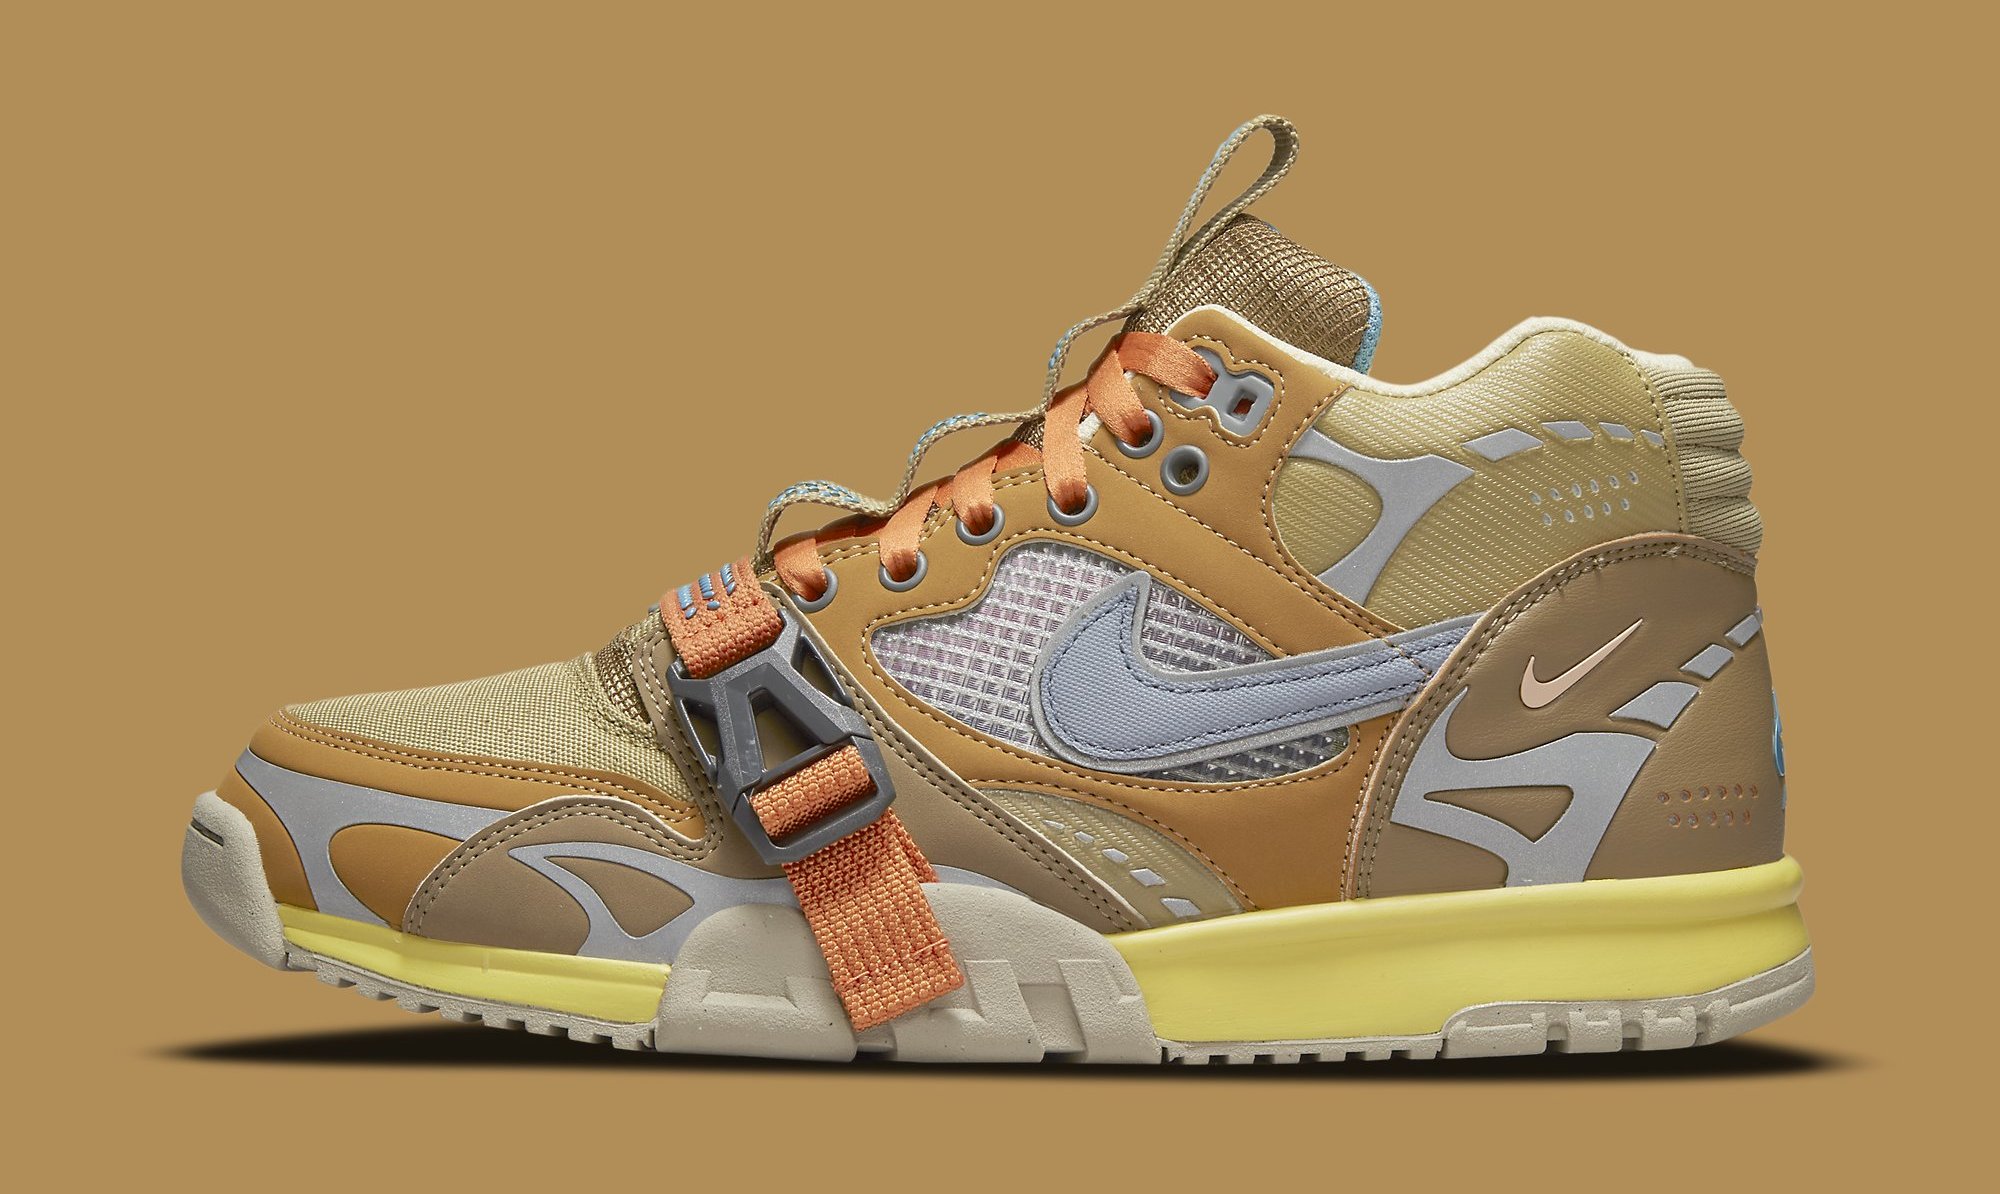 Titolo on X: The Air Trainer III debuted in 1988 and was endorsed